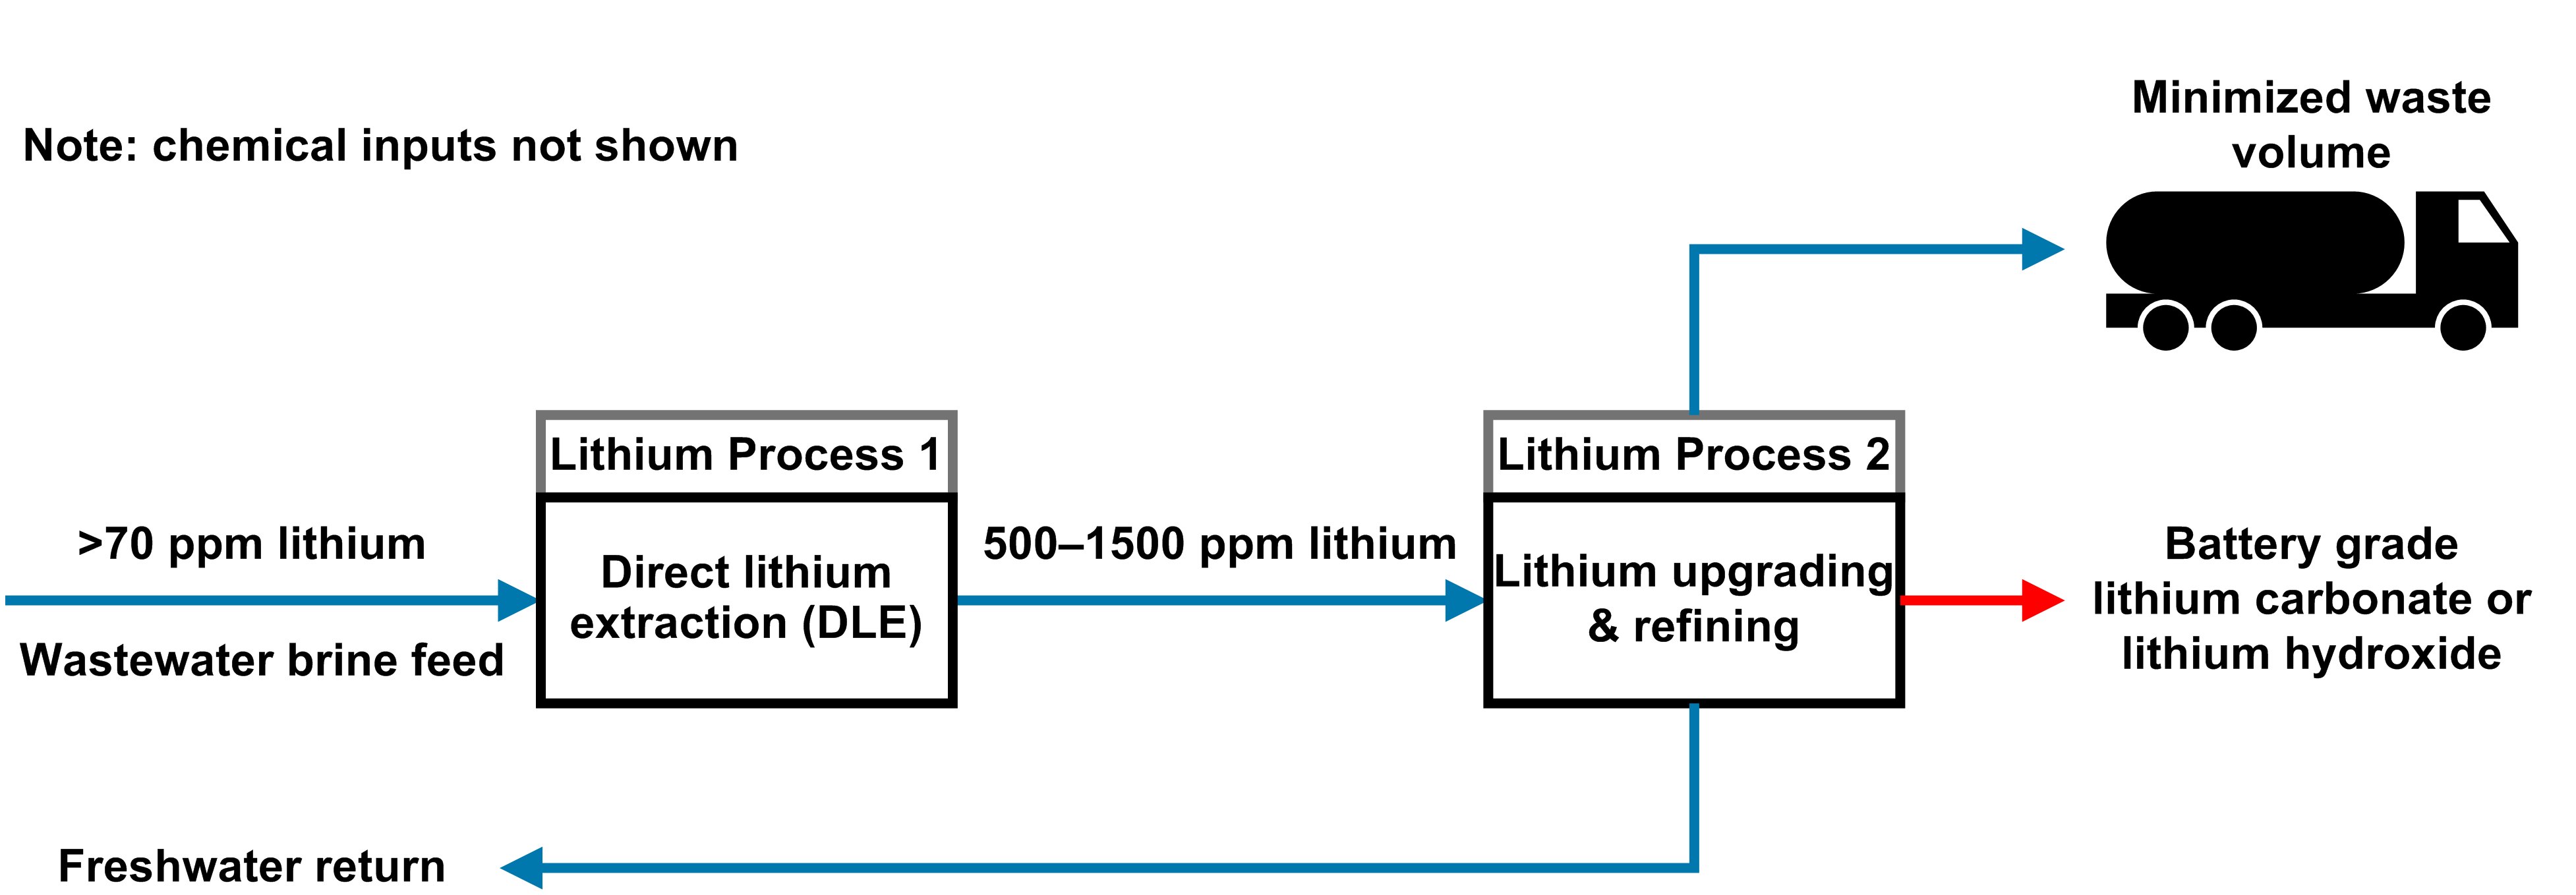 Harvesting lithium from wastewater involves Direct Lithium Extraction (DLE) and lithium upgrading and refining.